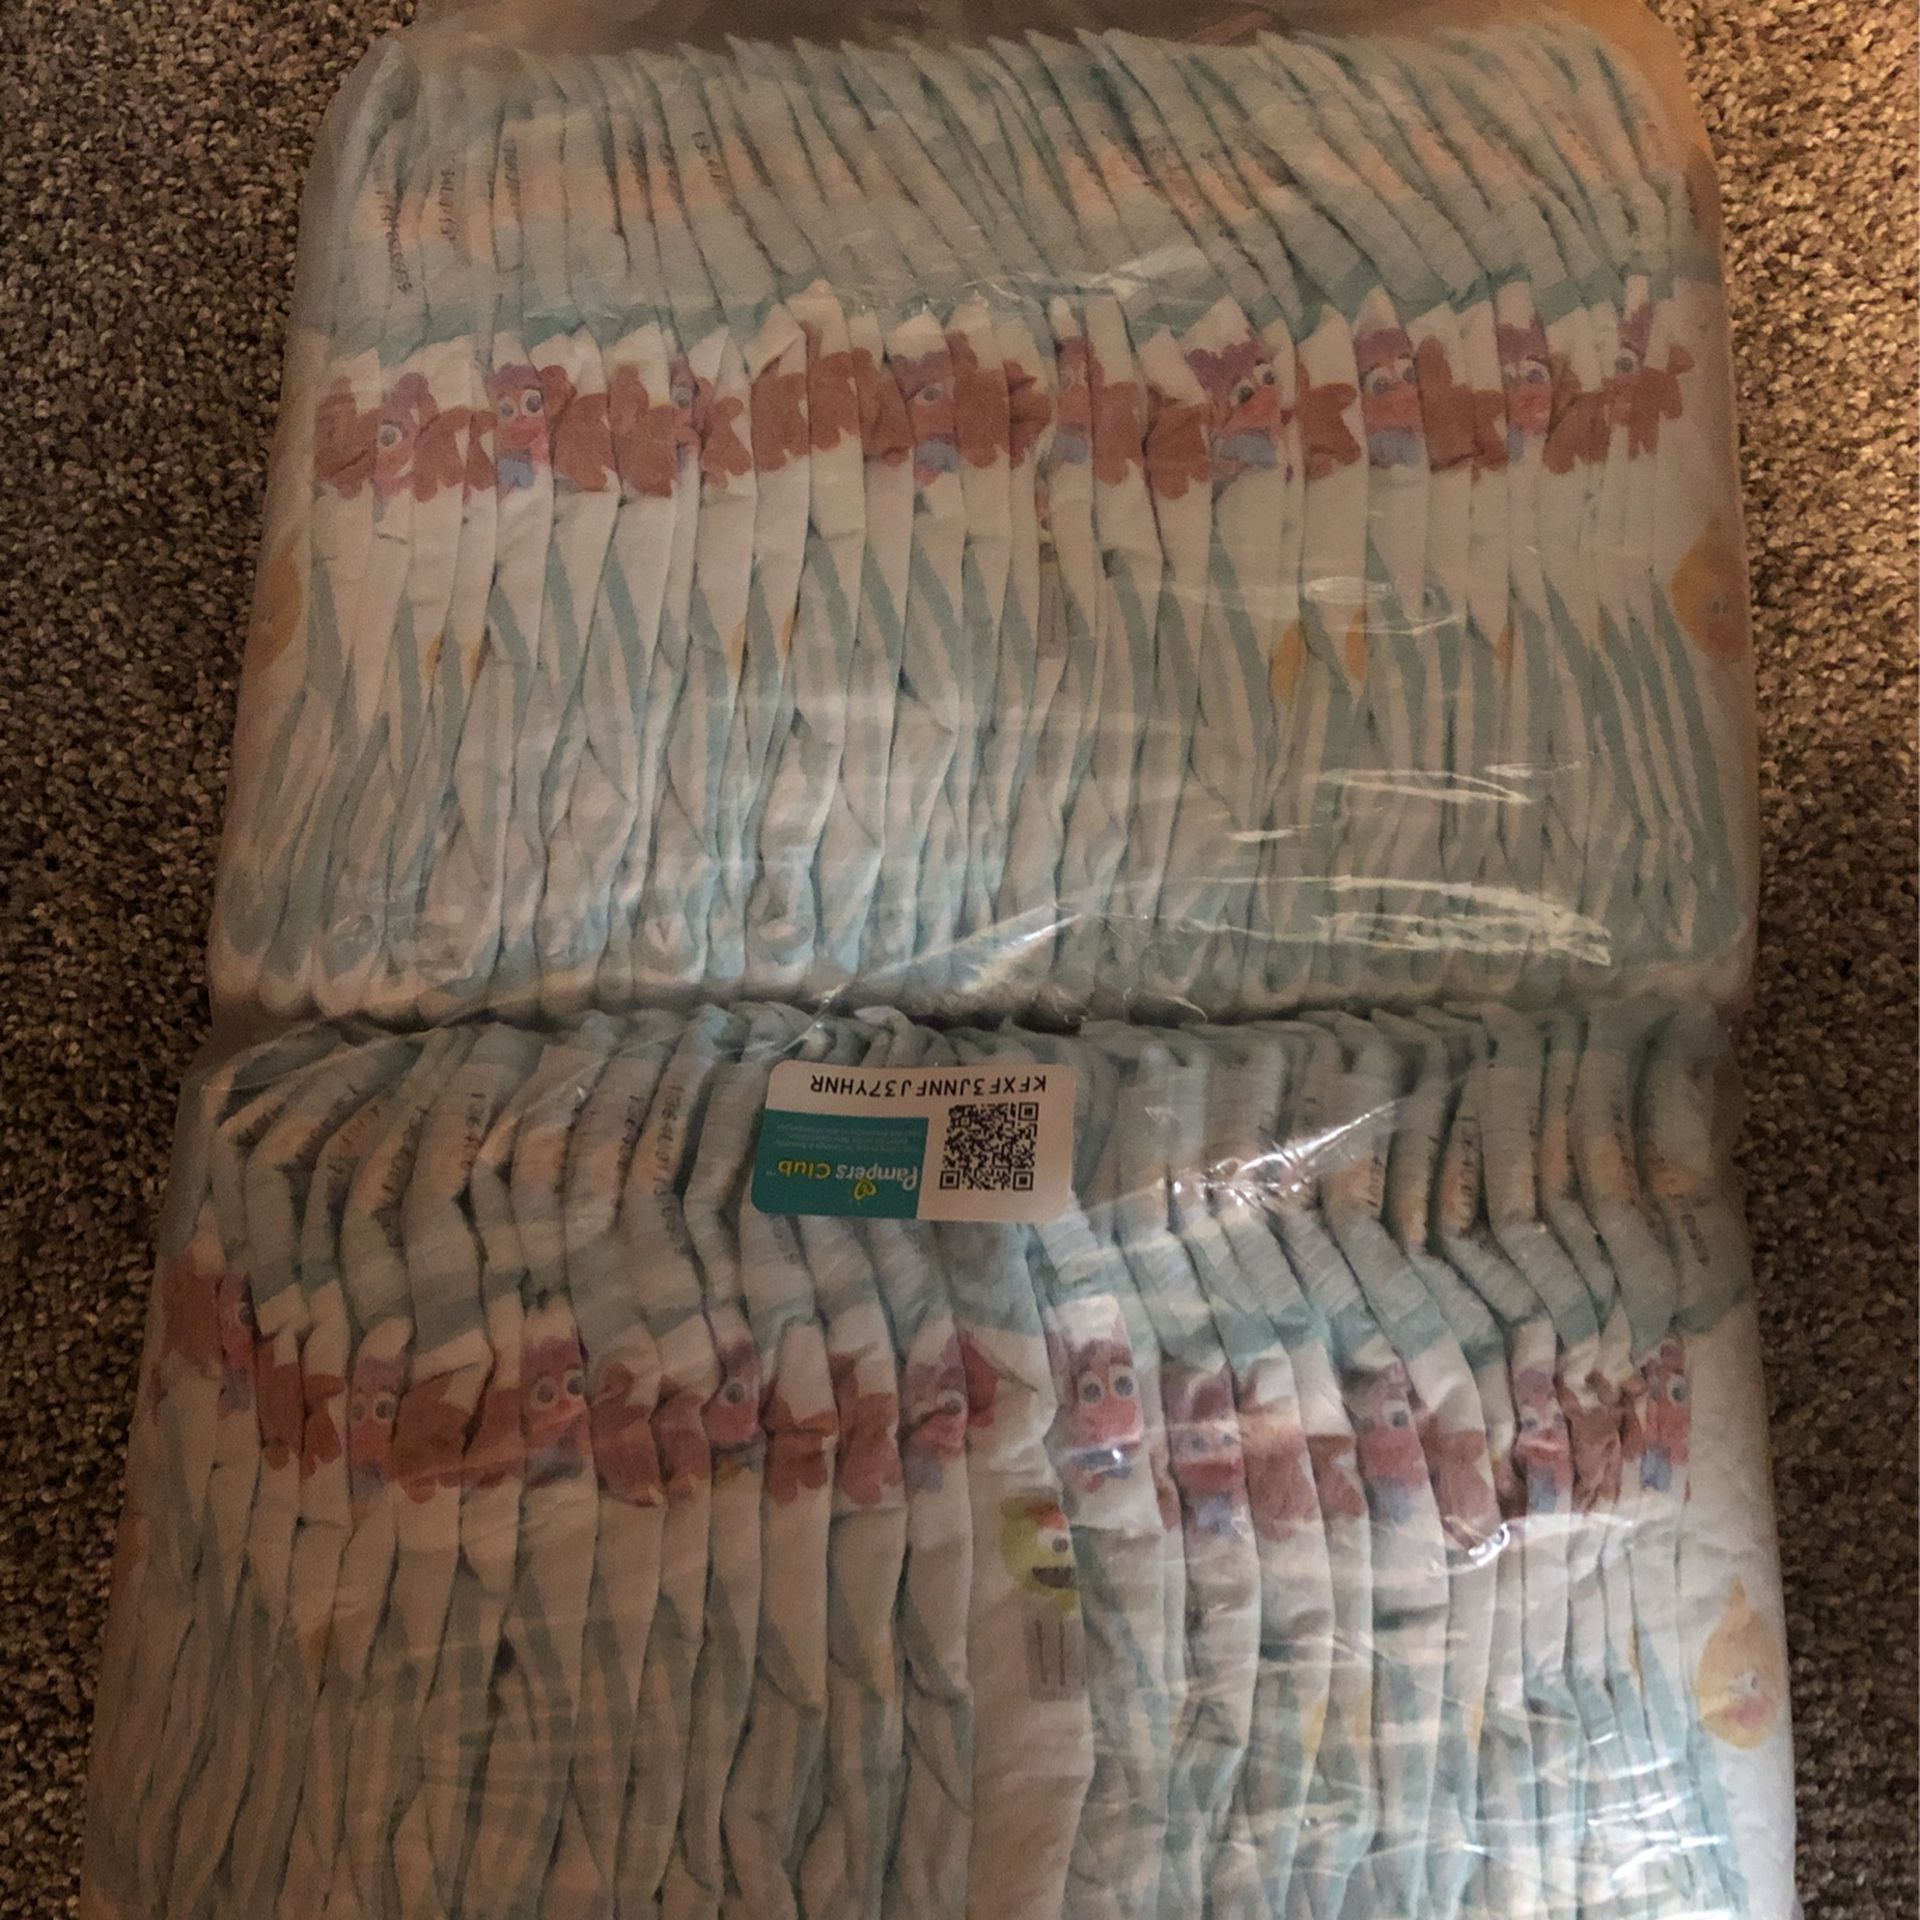 Pampers Baby Diapers Size 1